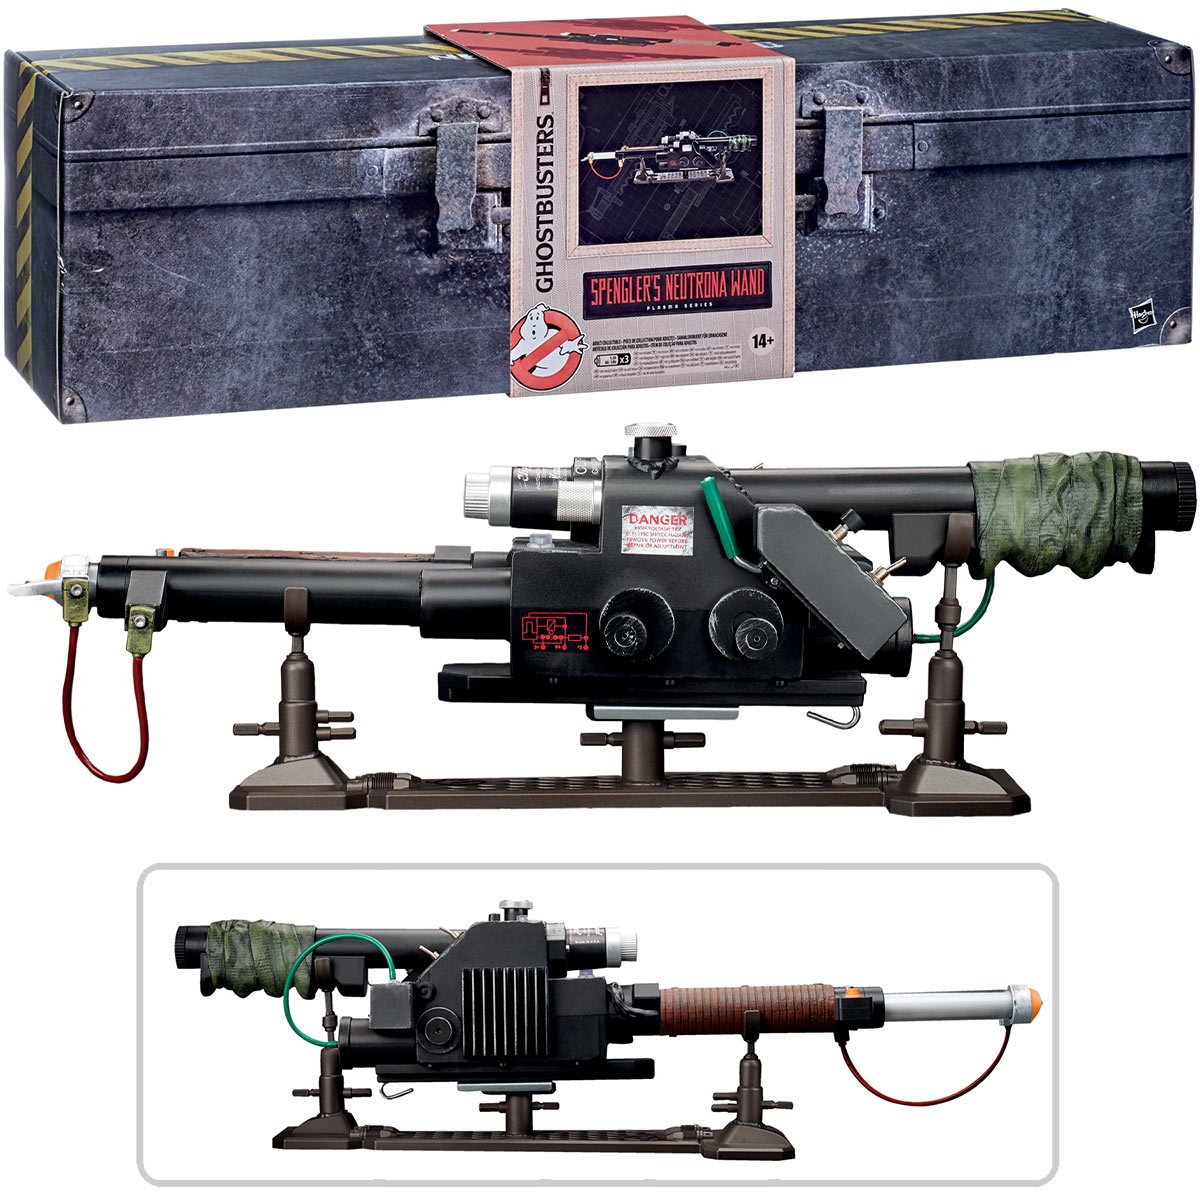 ROLE PLAY GHOSTBUSTERS PLASMA SERIES NEUTRONA WAND IN STOCK 